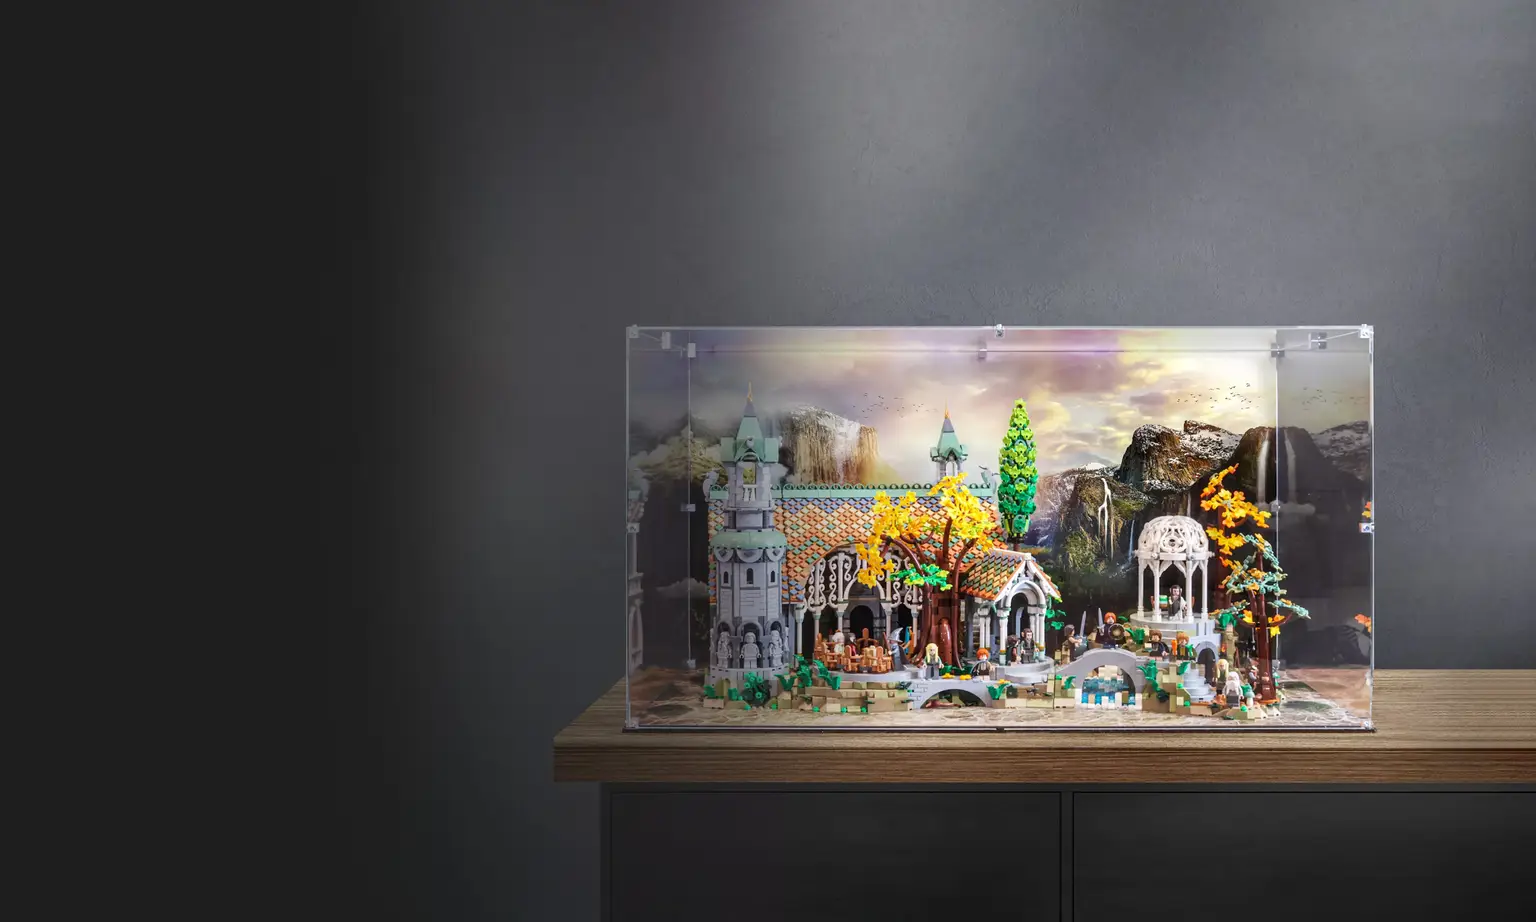 Rivendell LEGO Set in a BOXXCO Display Case